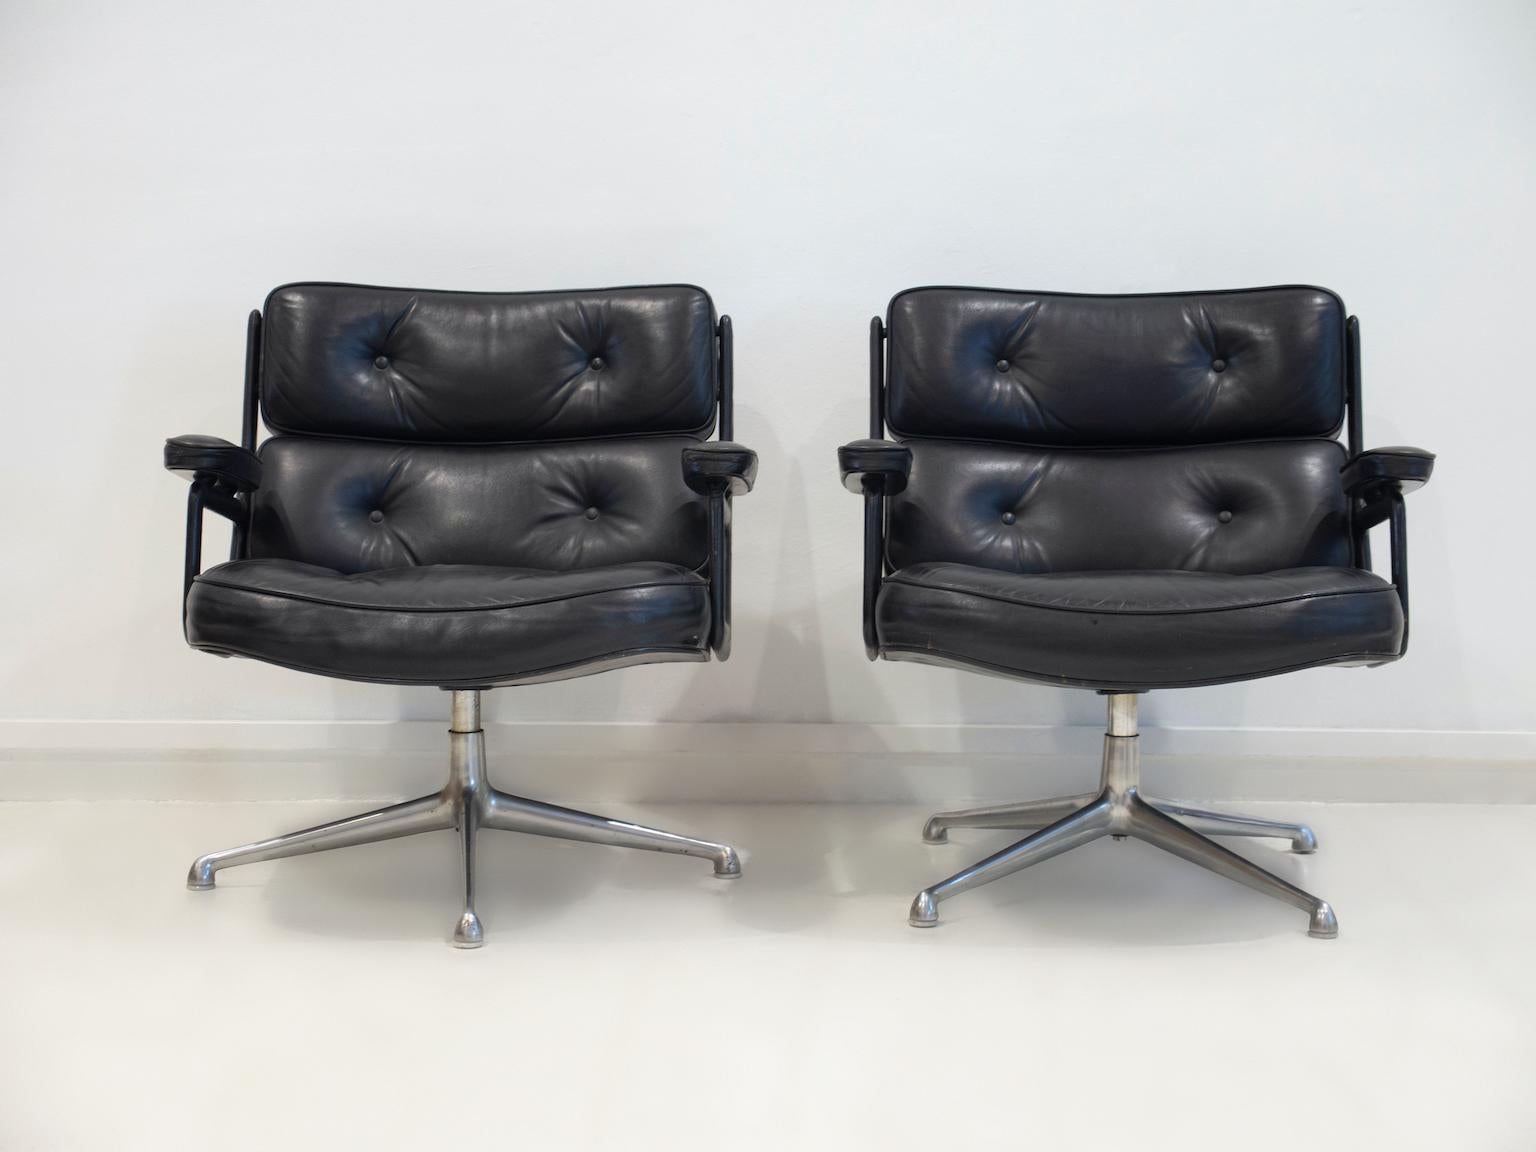 20th Century Pair of Black Leather Executive Chairs by Charles and Ray Eames For Sale